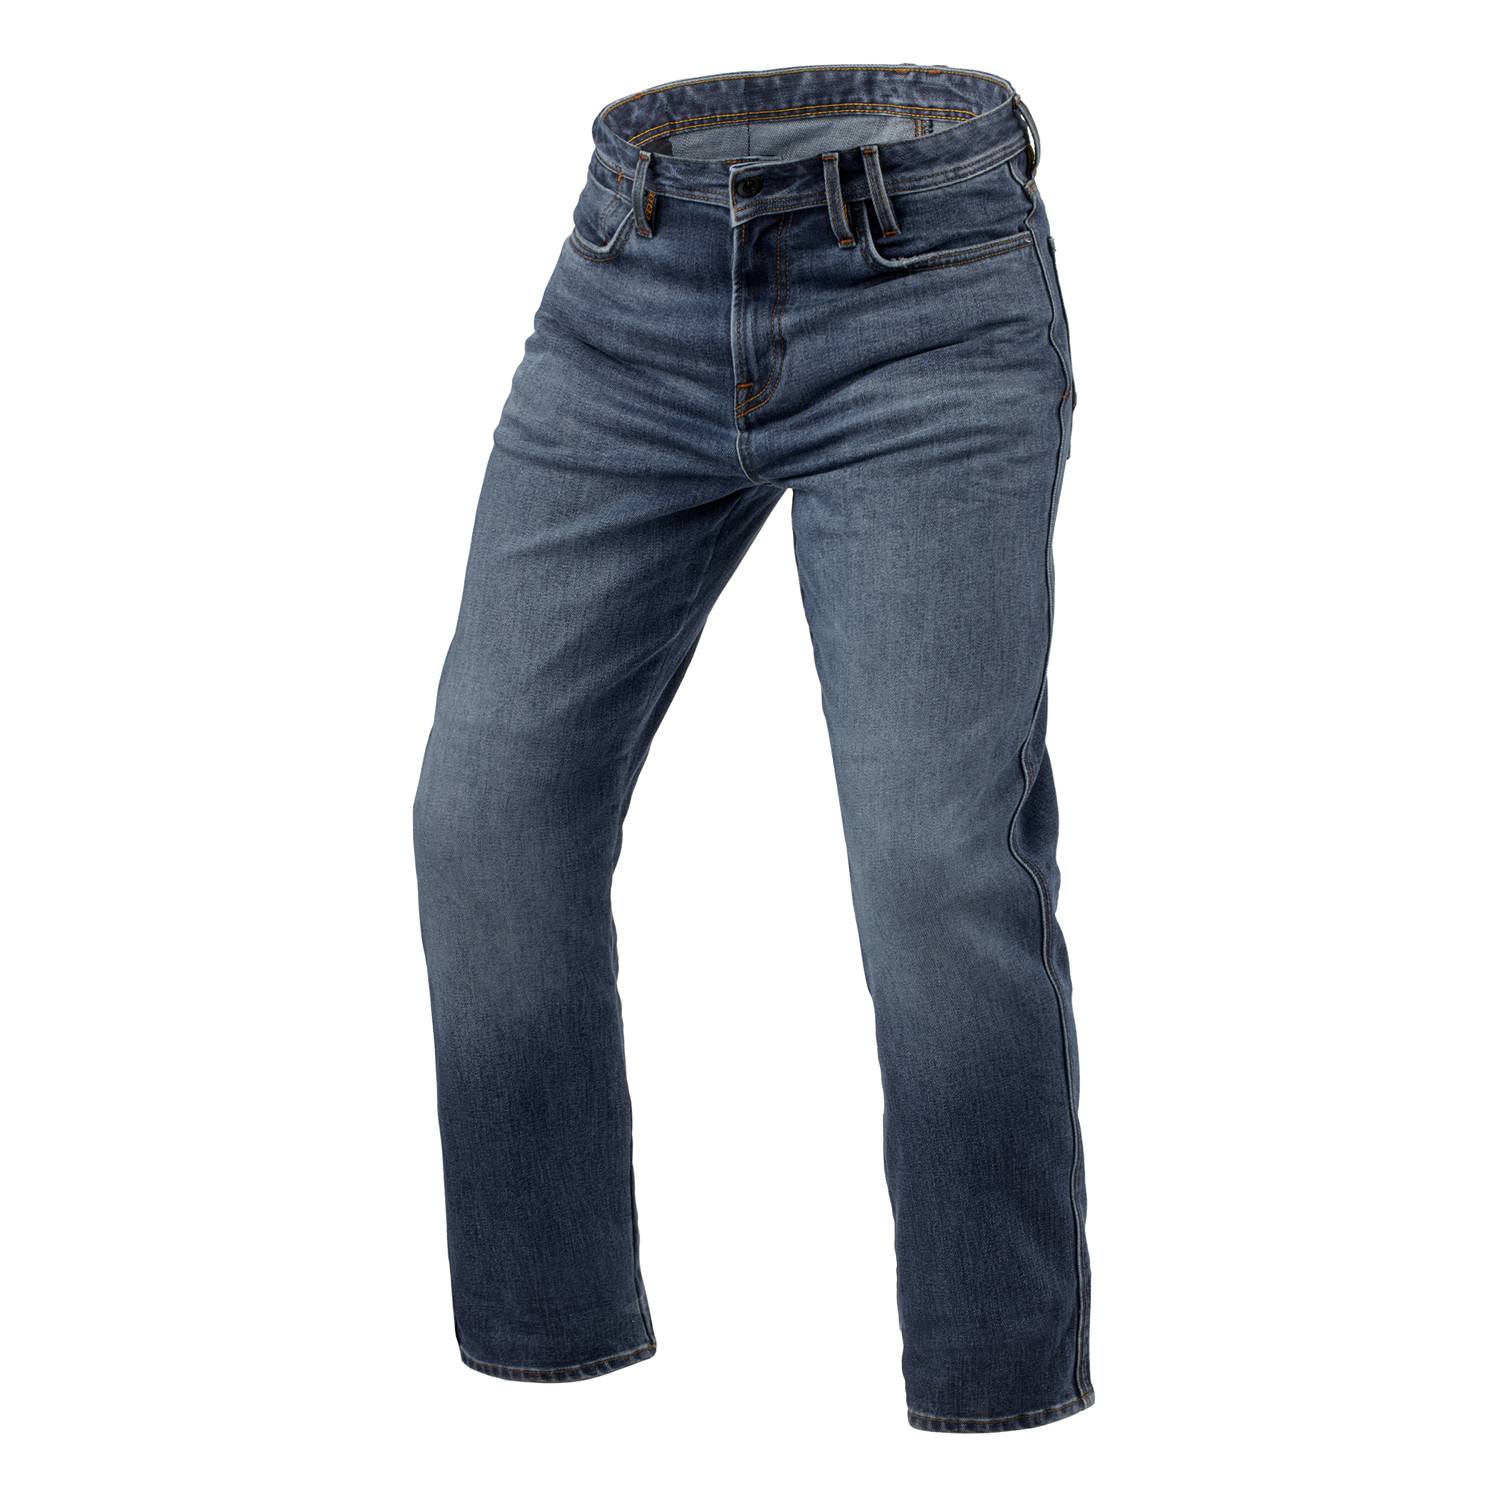 Image of REV'IT! Jeans Lombard 3 RF Medium Blue Stone L36 Motorcycle Jeans Taille L36/W31